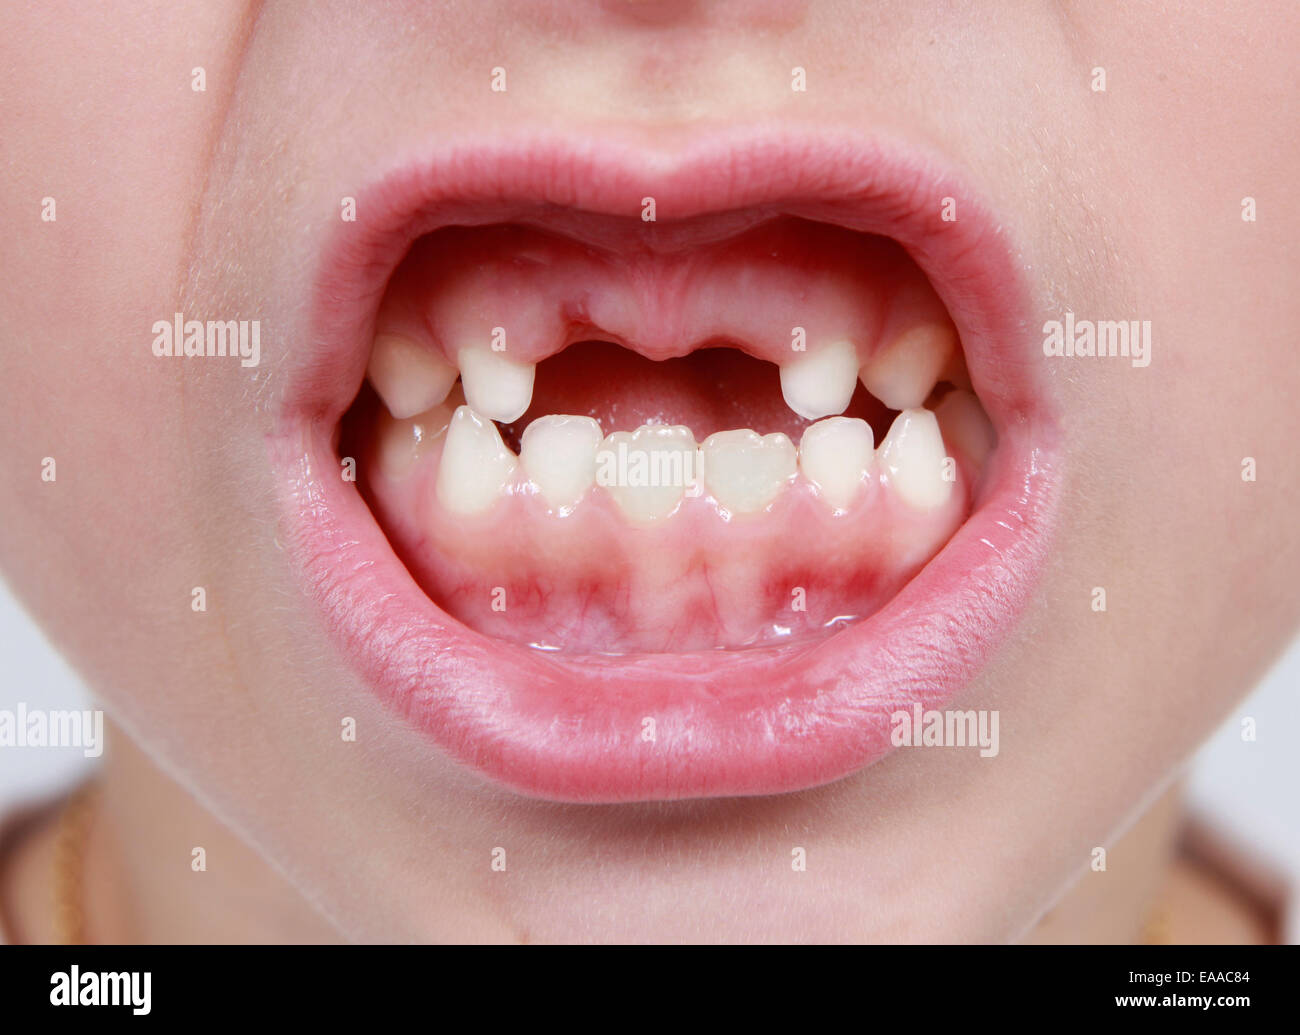 Closeup of child's month with missing teeth Stock Photo